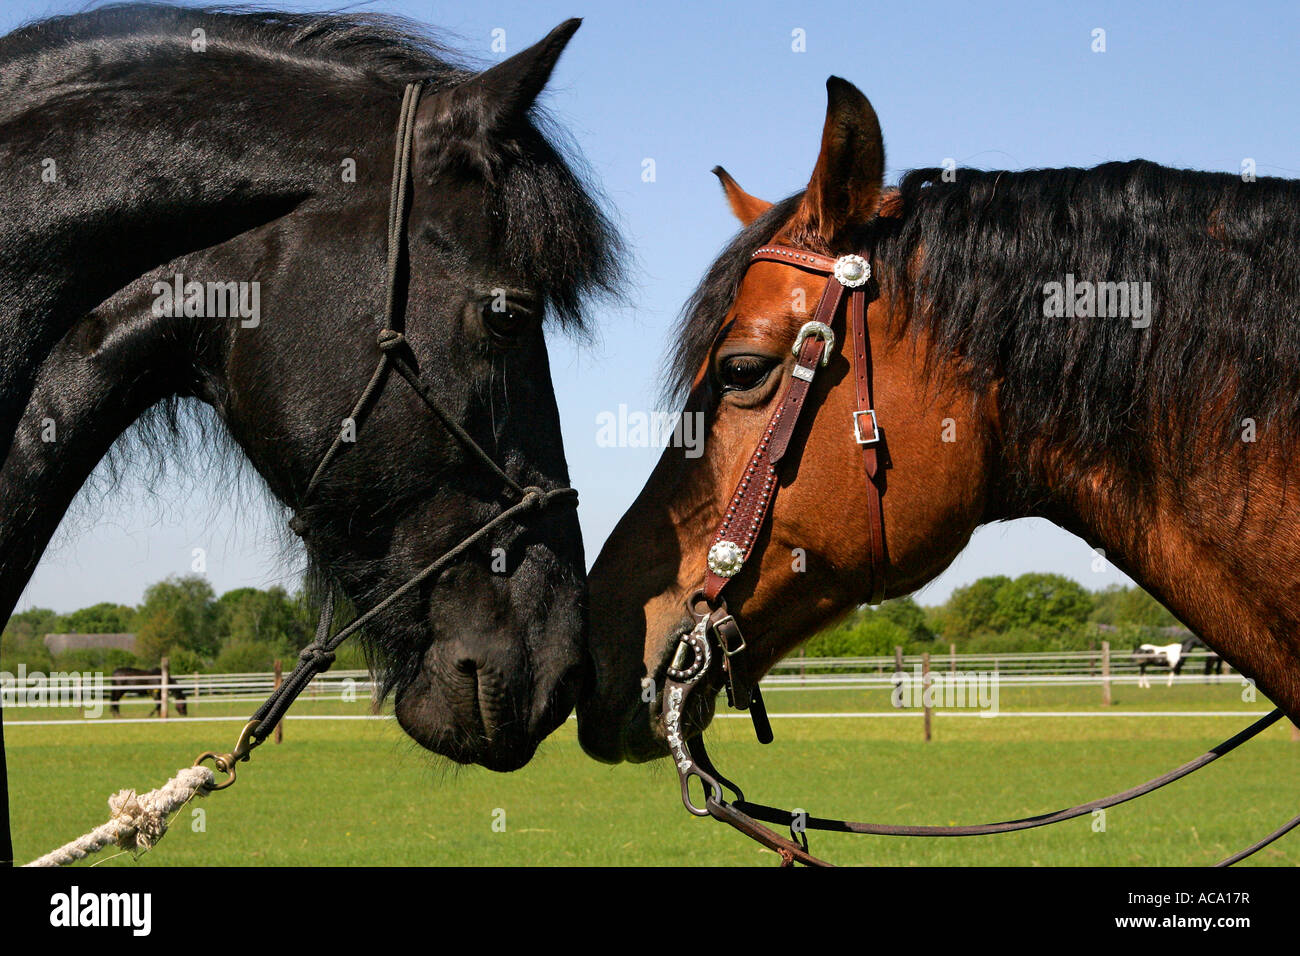 Two horses in contact sniffing at each other (Equus przewalskii f. caballus) Stock Photo